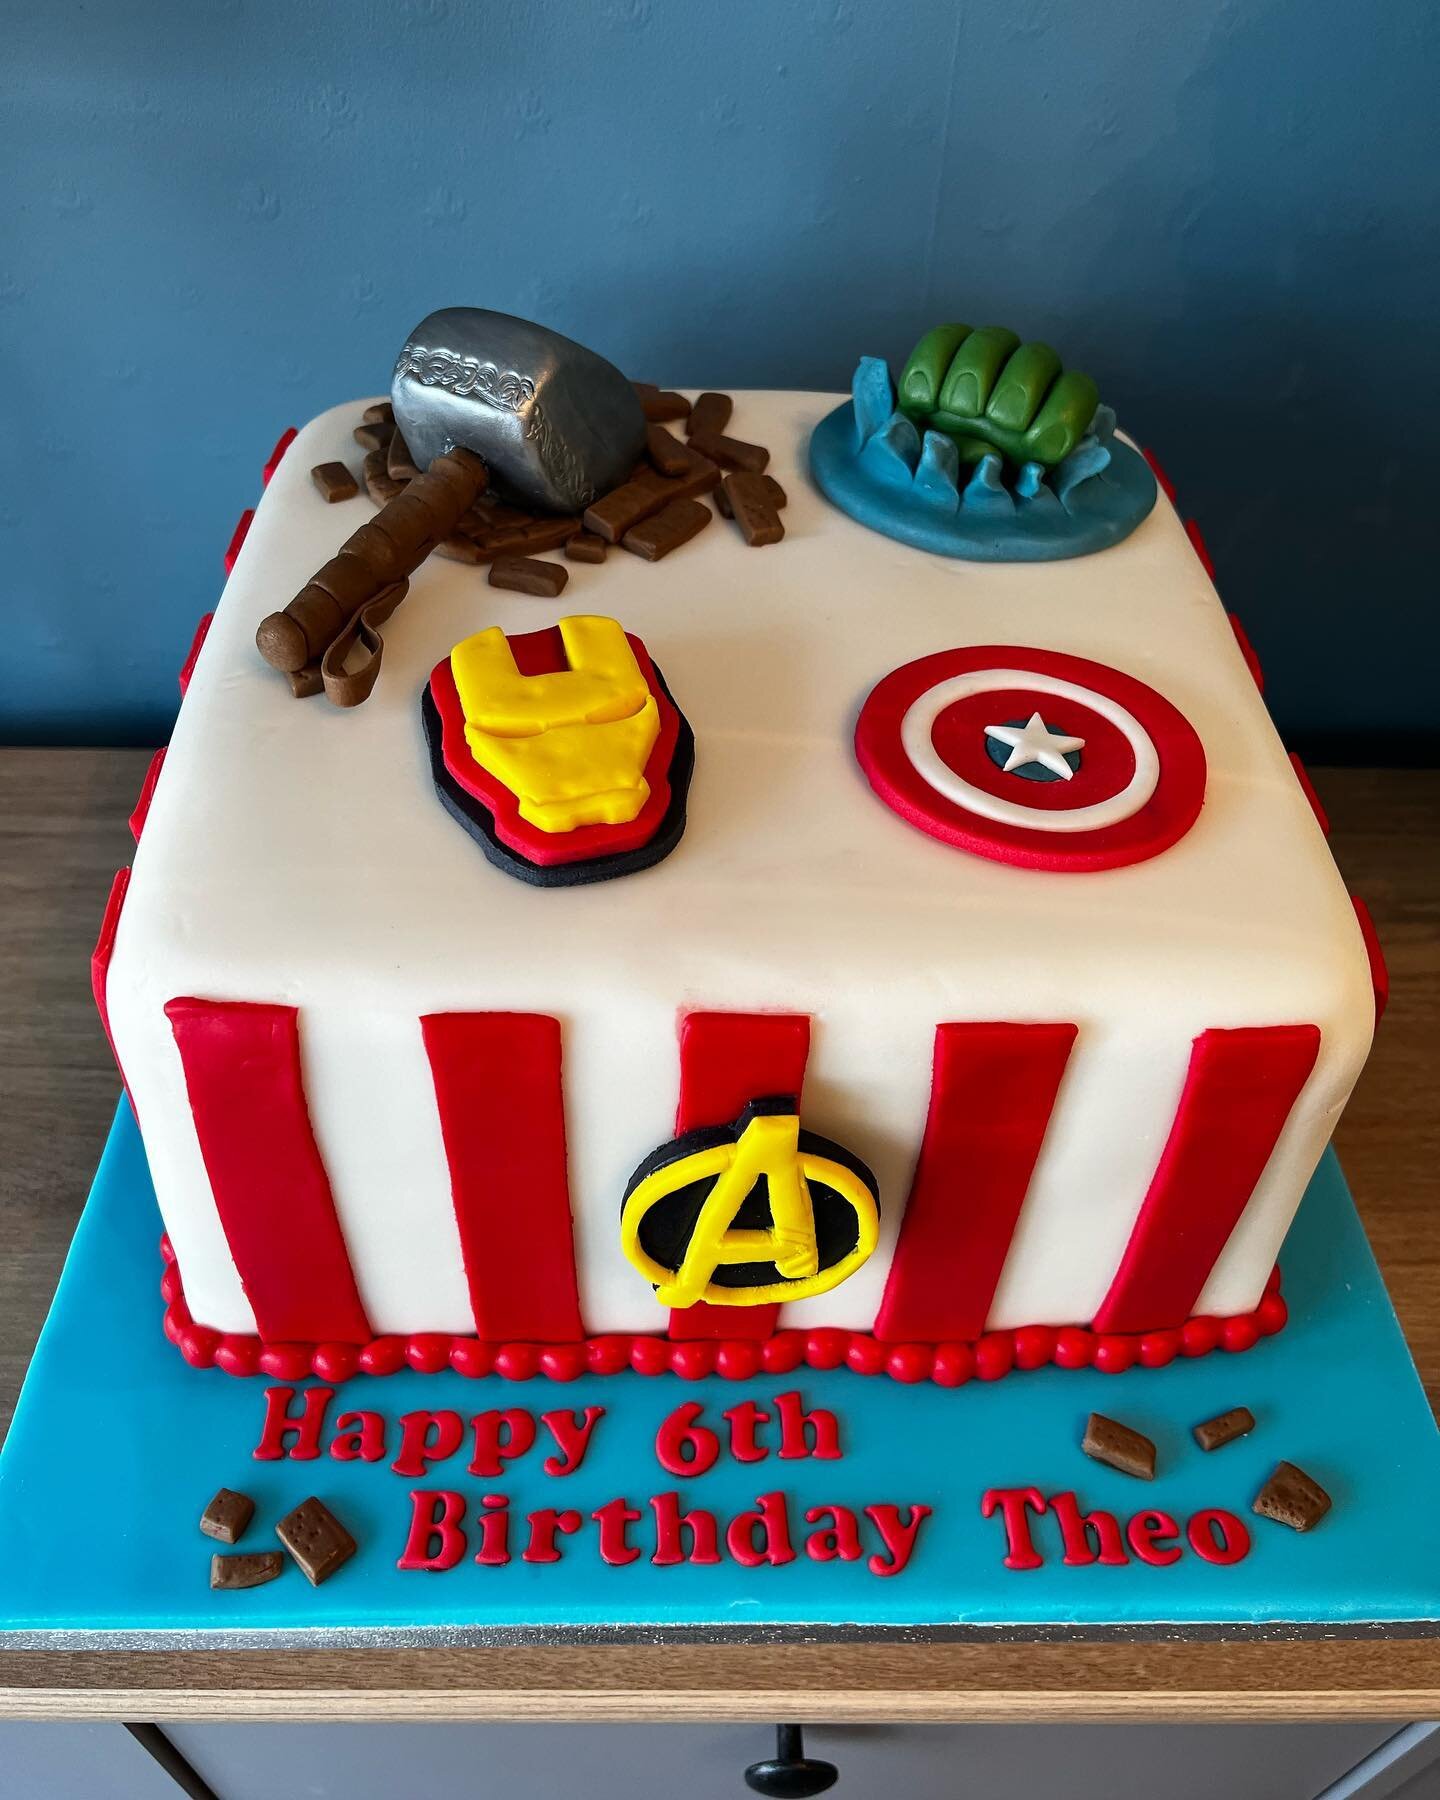 Theo had a chocolate avengers style cake for his 5th Birthday.  Hope you had a lovely birthday xx